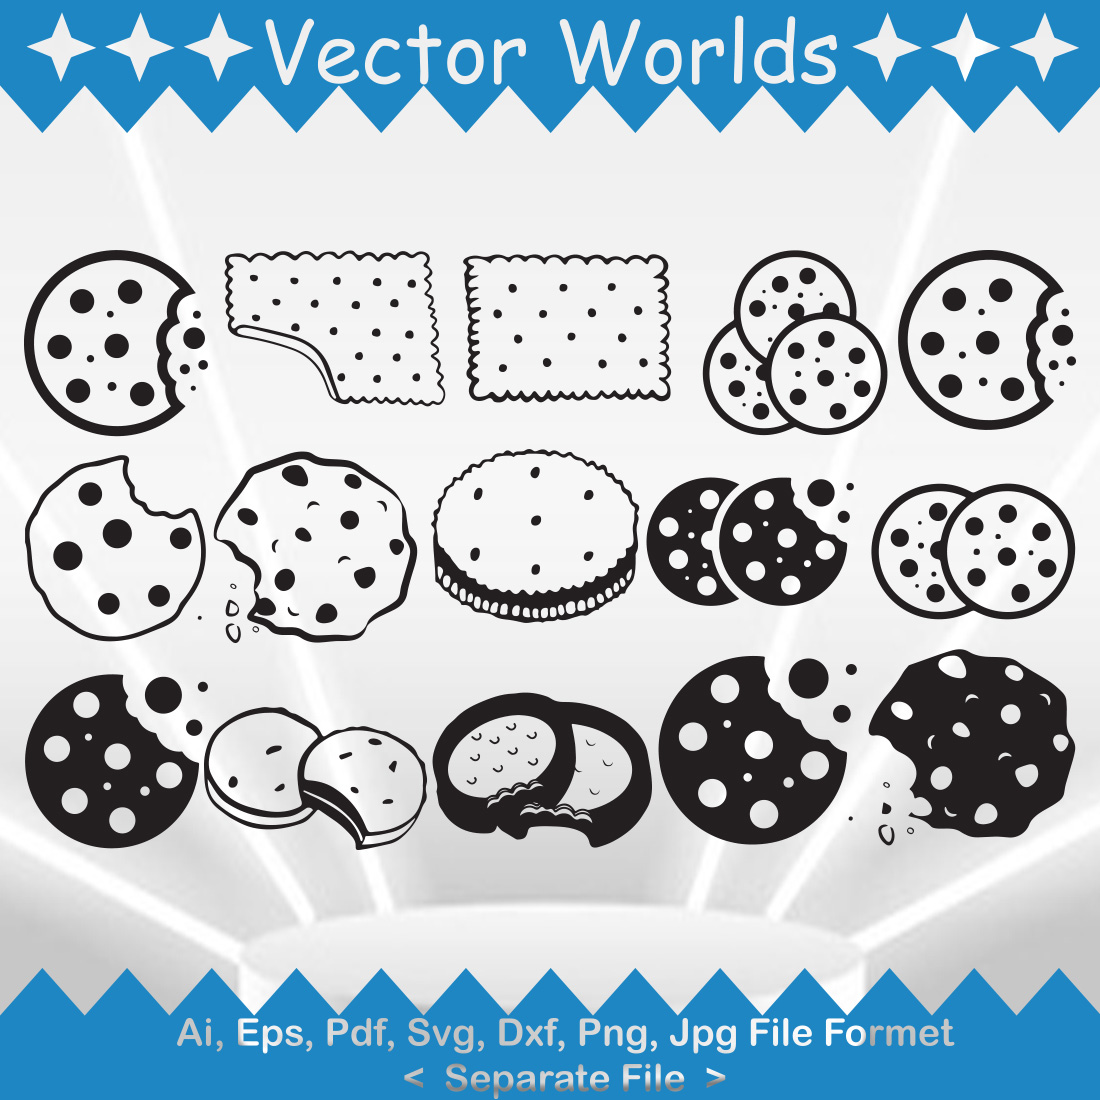 Collection of gorgeous vector image silhouettes of cookies